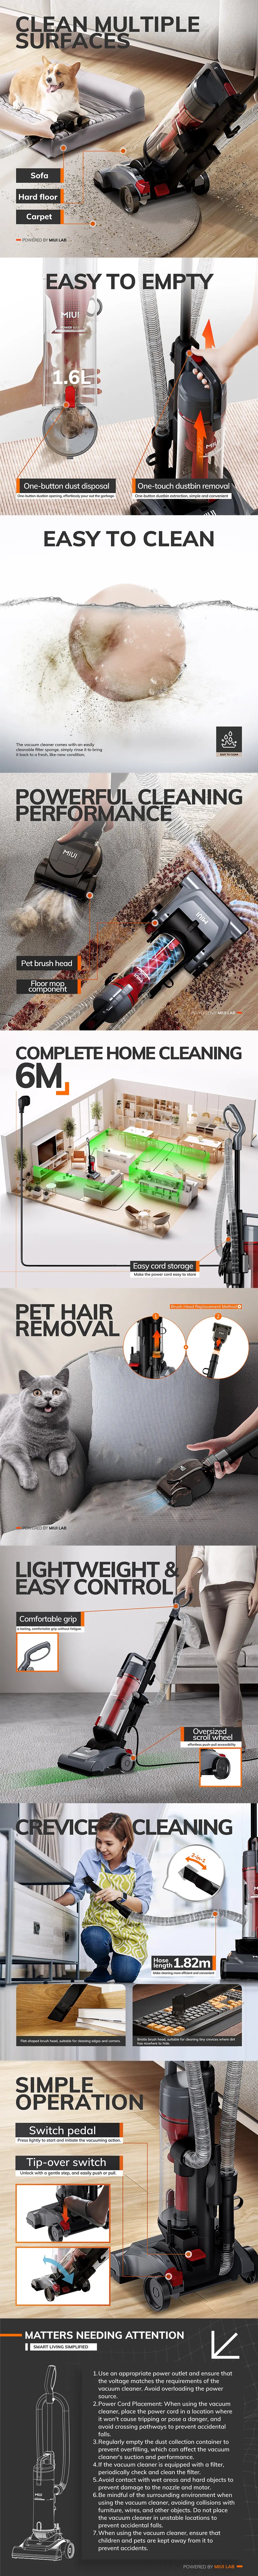 Multi-feature, easy-to-use vacuum cleaner equipped with a one-touch dustbin and convenient cord storage. Lightweight for easy control, with powerful suction for efficient cleaning. Perfect for pet owners and easy cleaning of tight spaces.